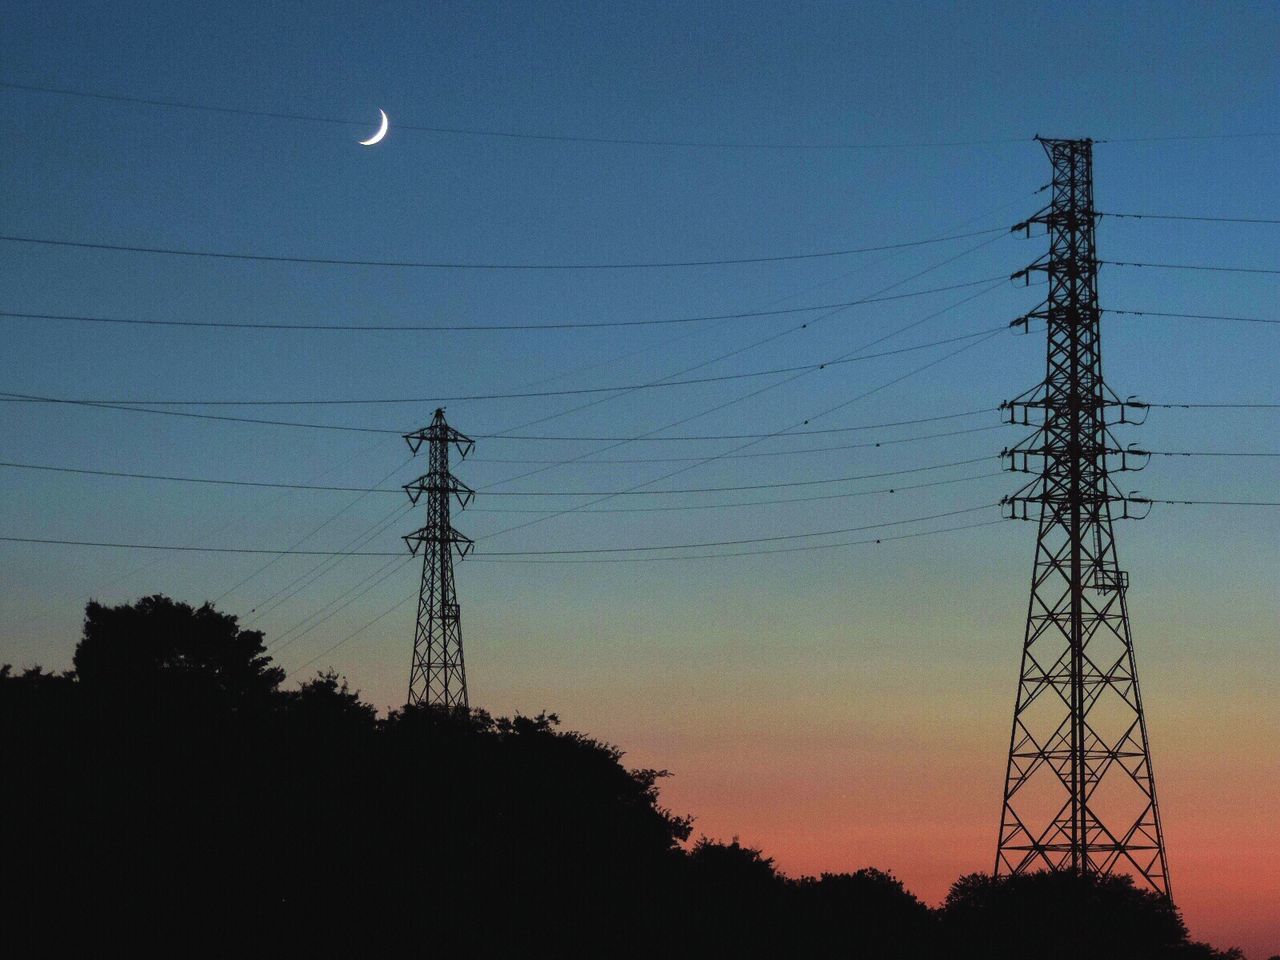 Low angle view of silhouette electricity pylon against moon in sky at dusk